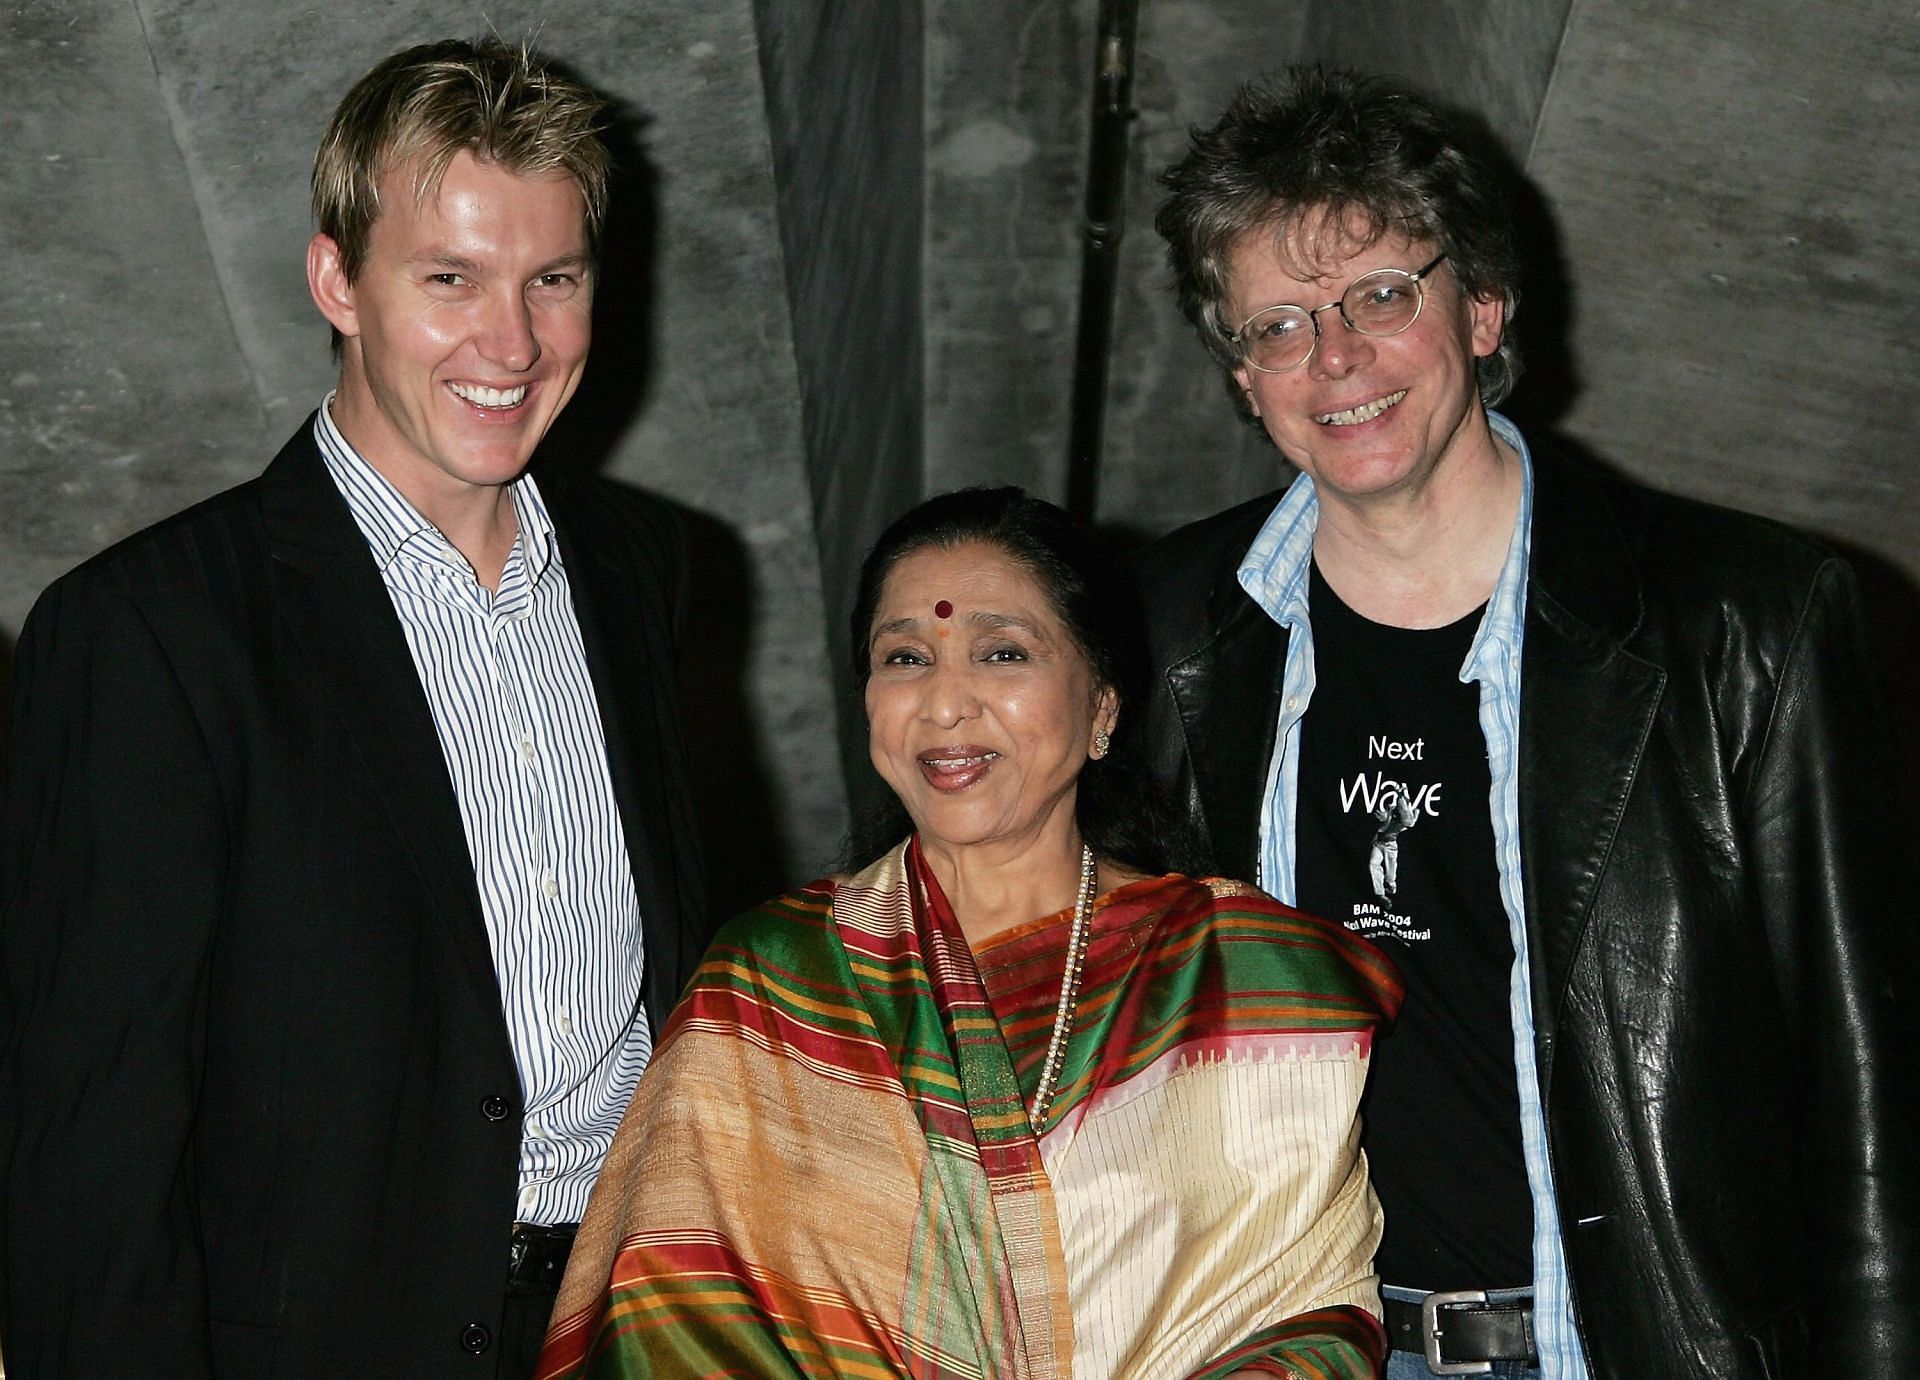 When Brett Lee recorded a song with Asha Bhosle